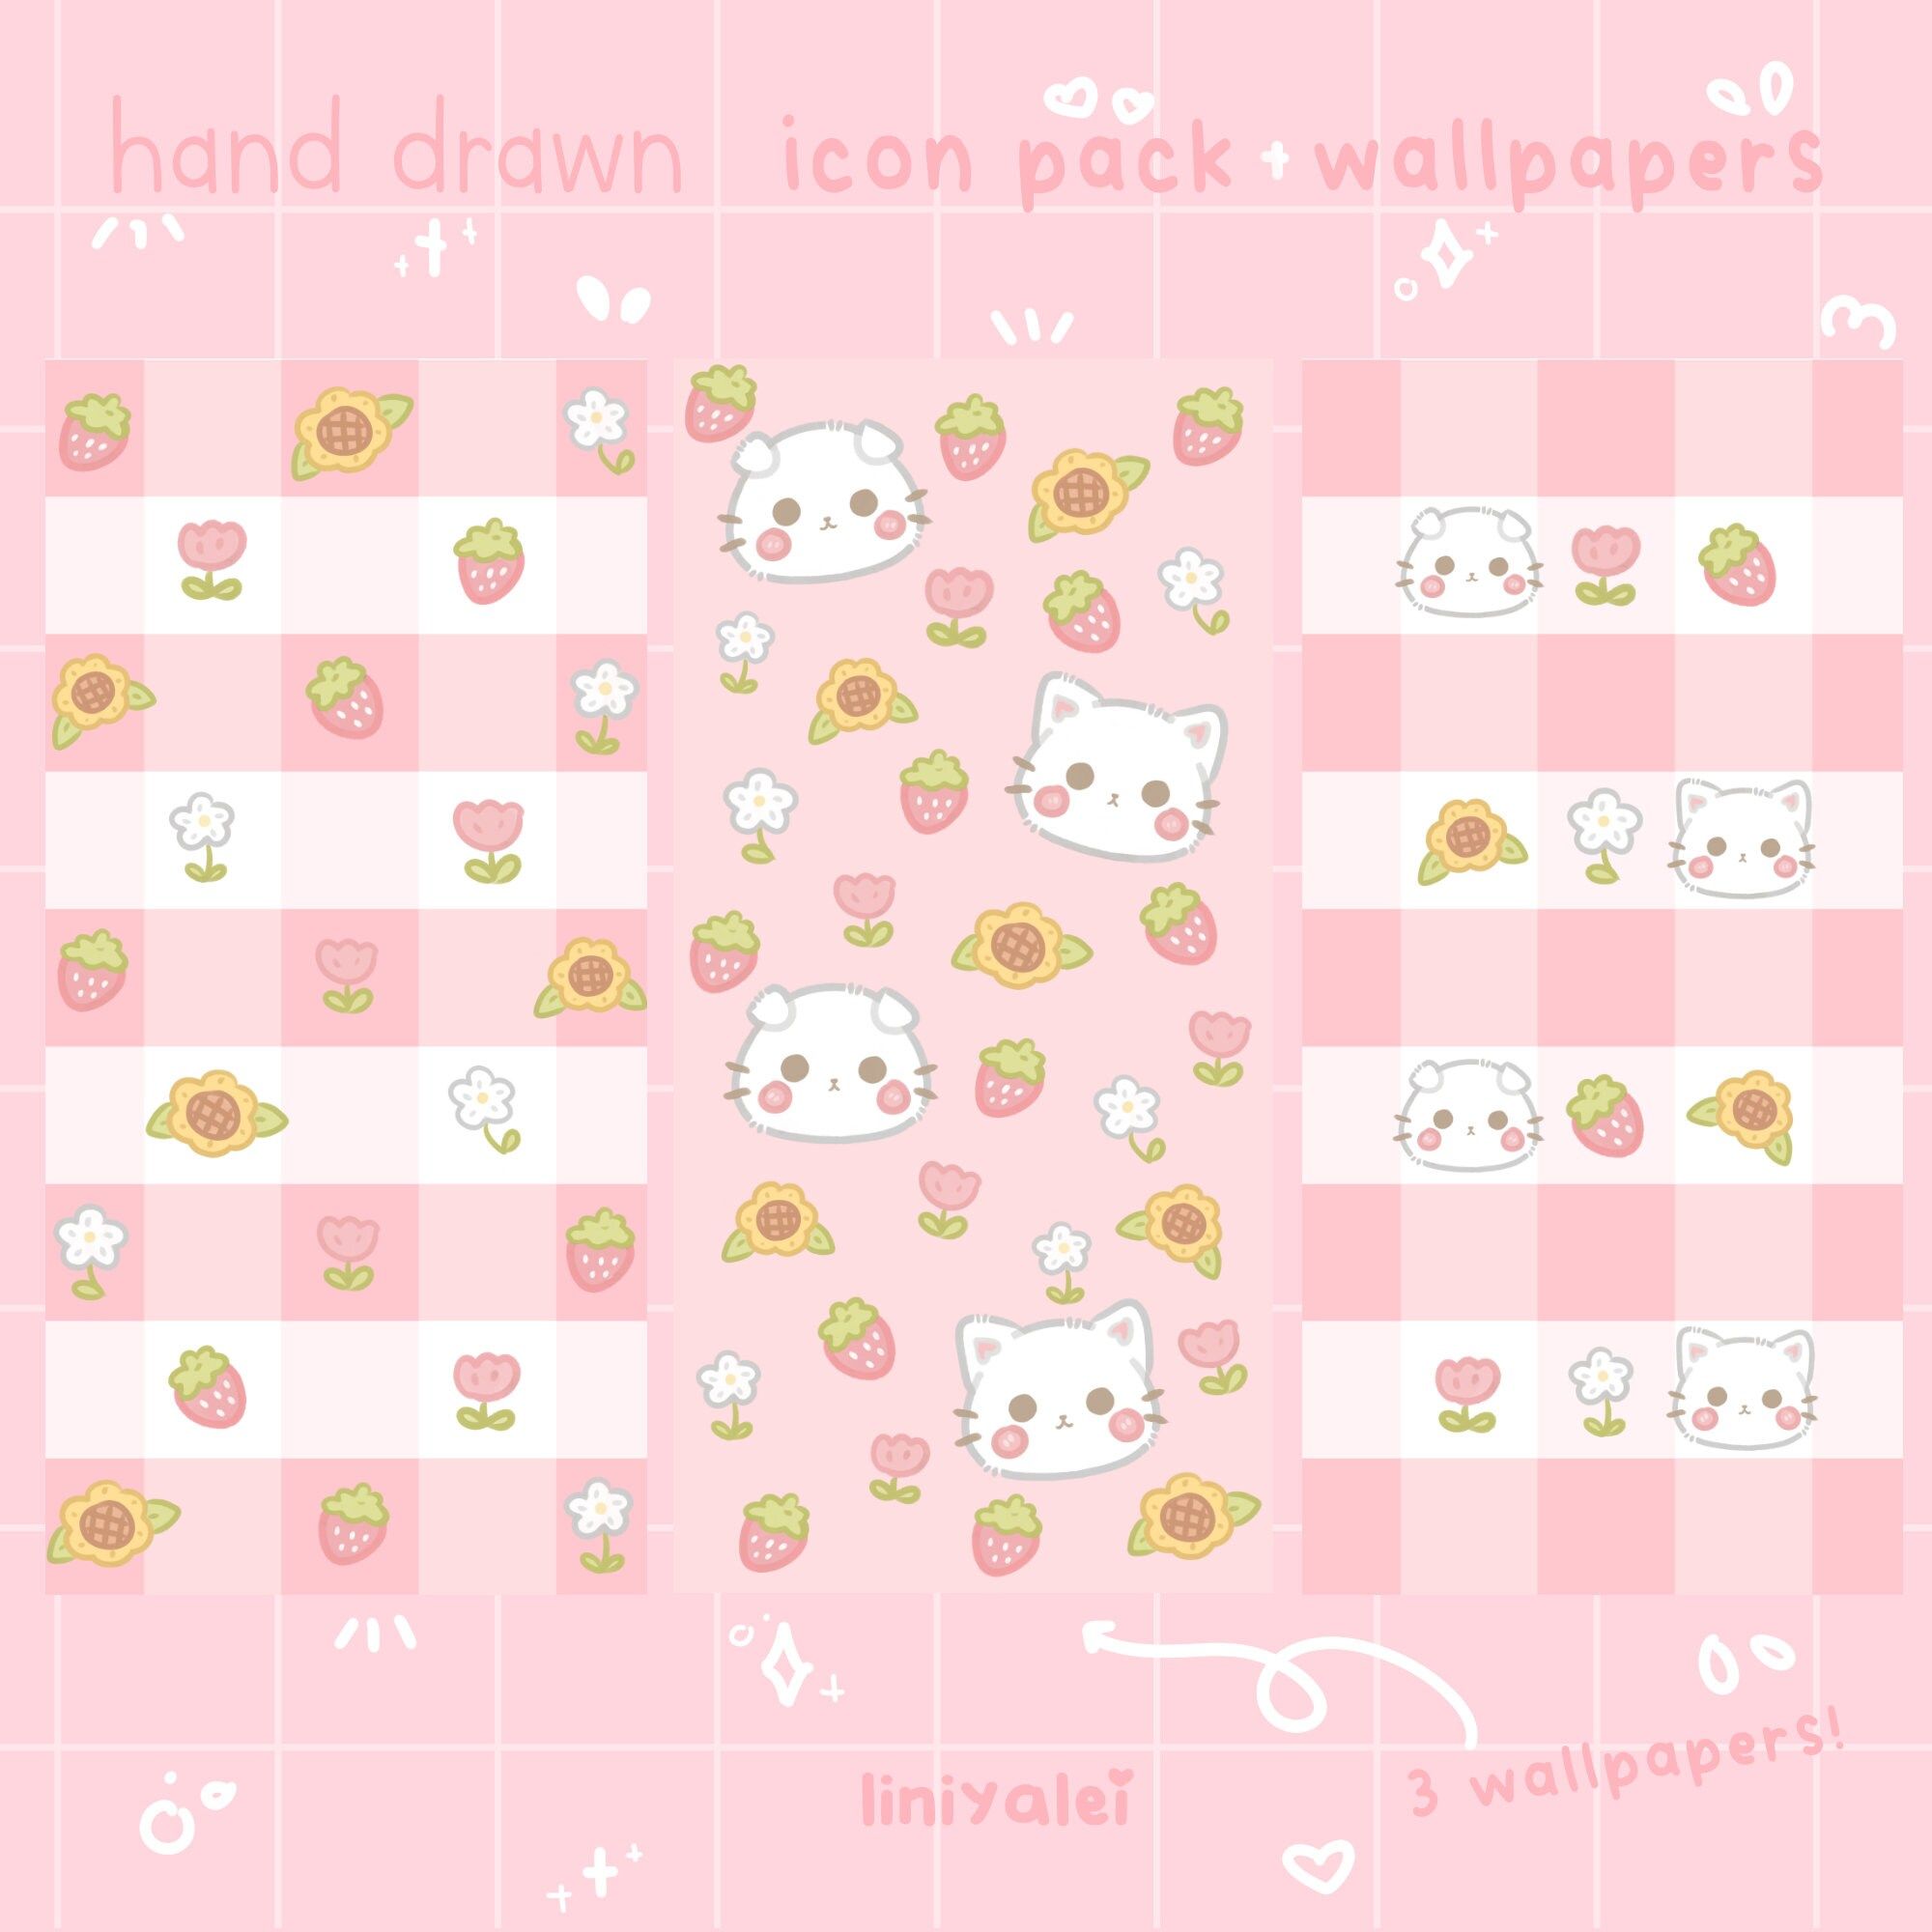 Kawaii App Icon Pack Wallpaper for Ios and Android / Cute